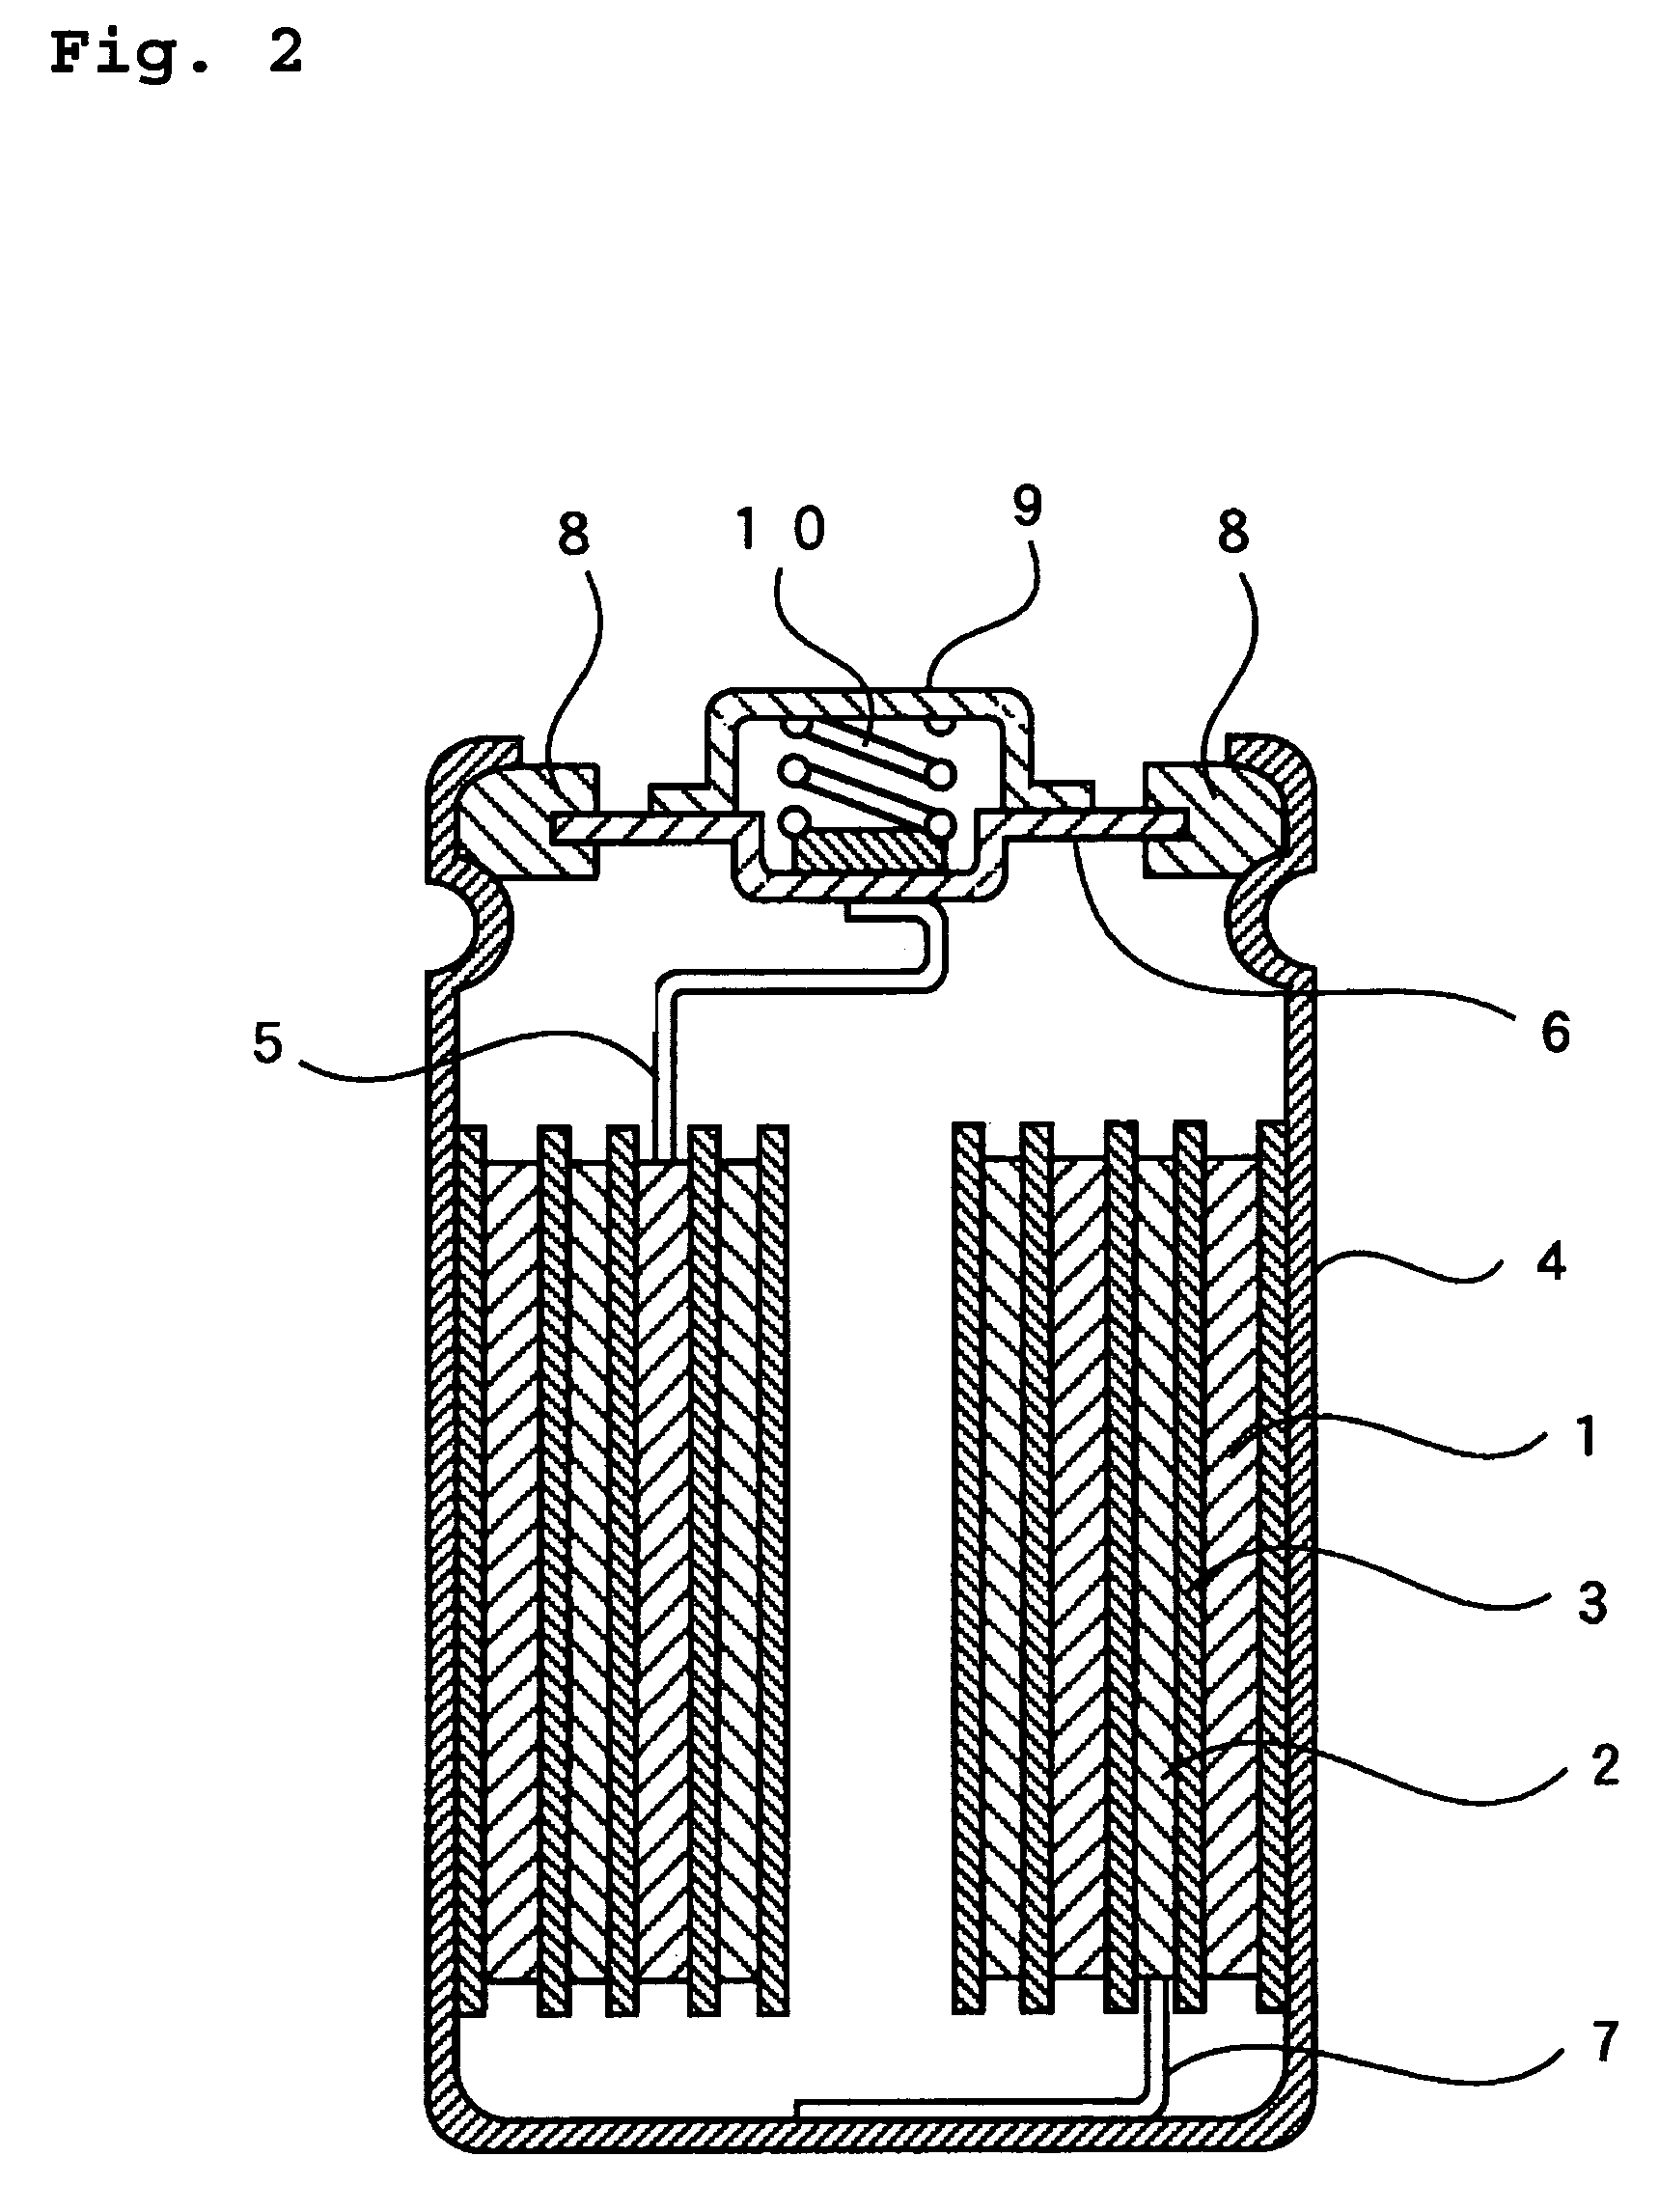 Hydrogen-absorbing alloy for alkaline storage battery, method of manufacturing the same, and alkaline storage battery